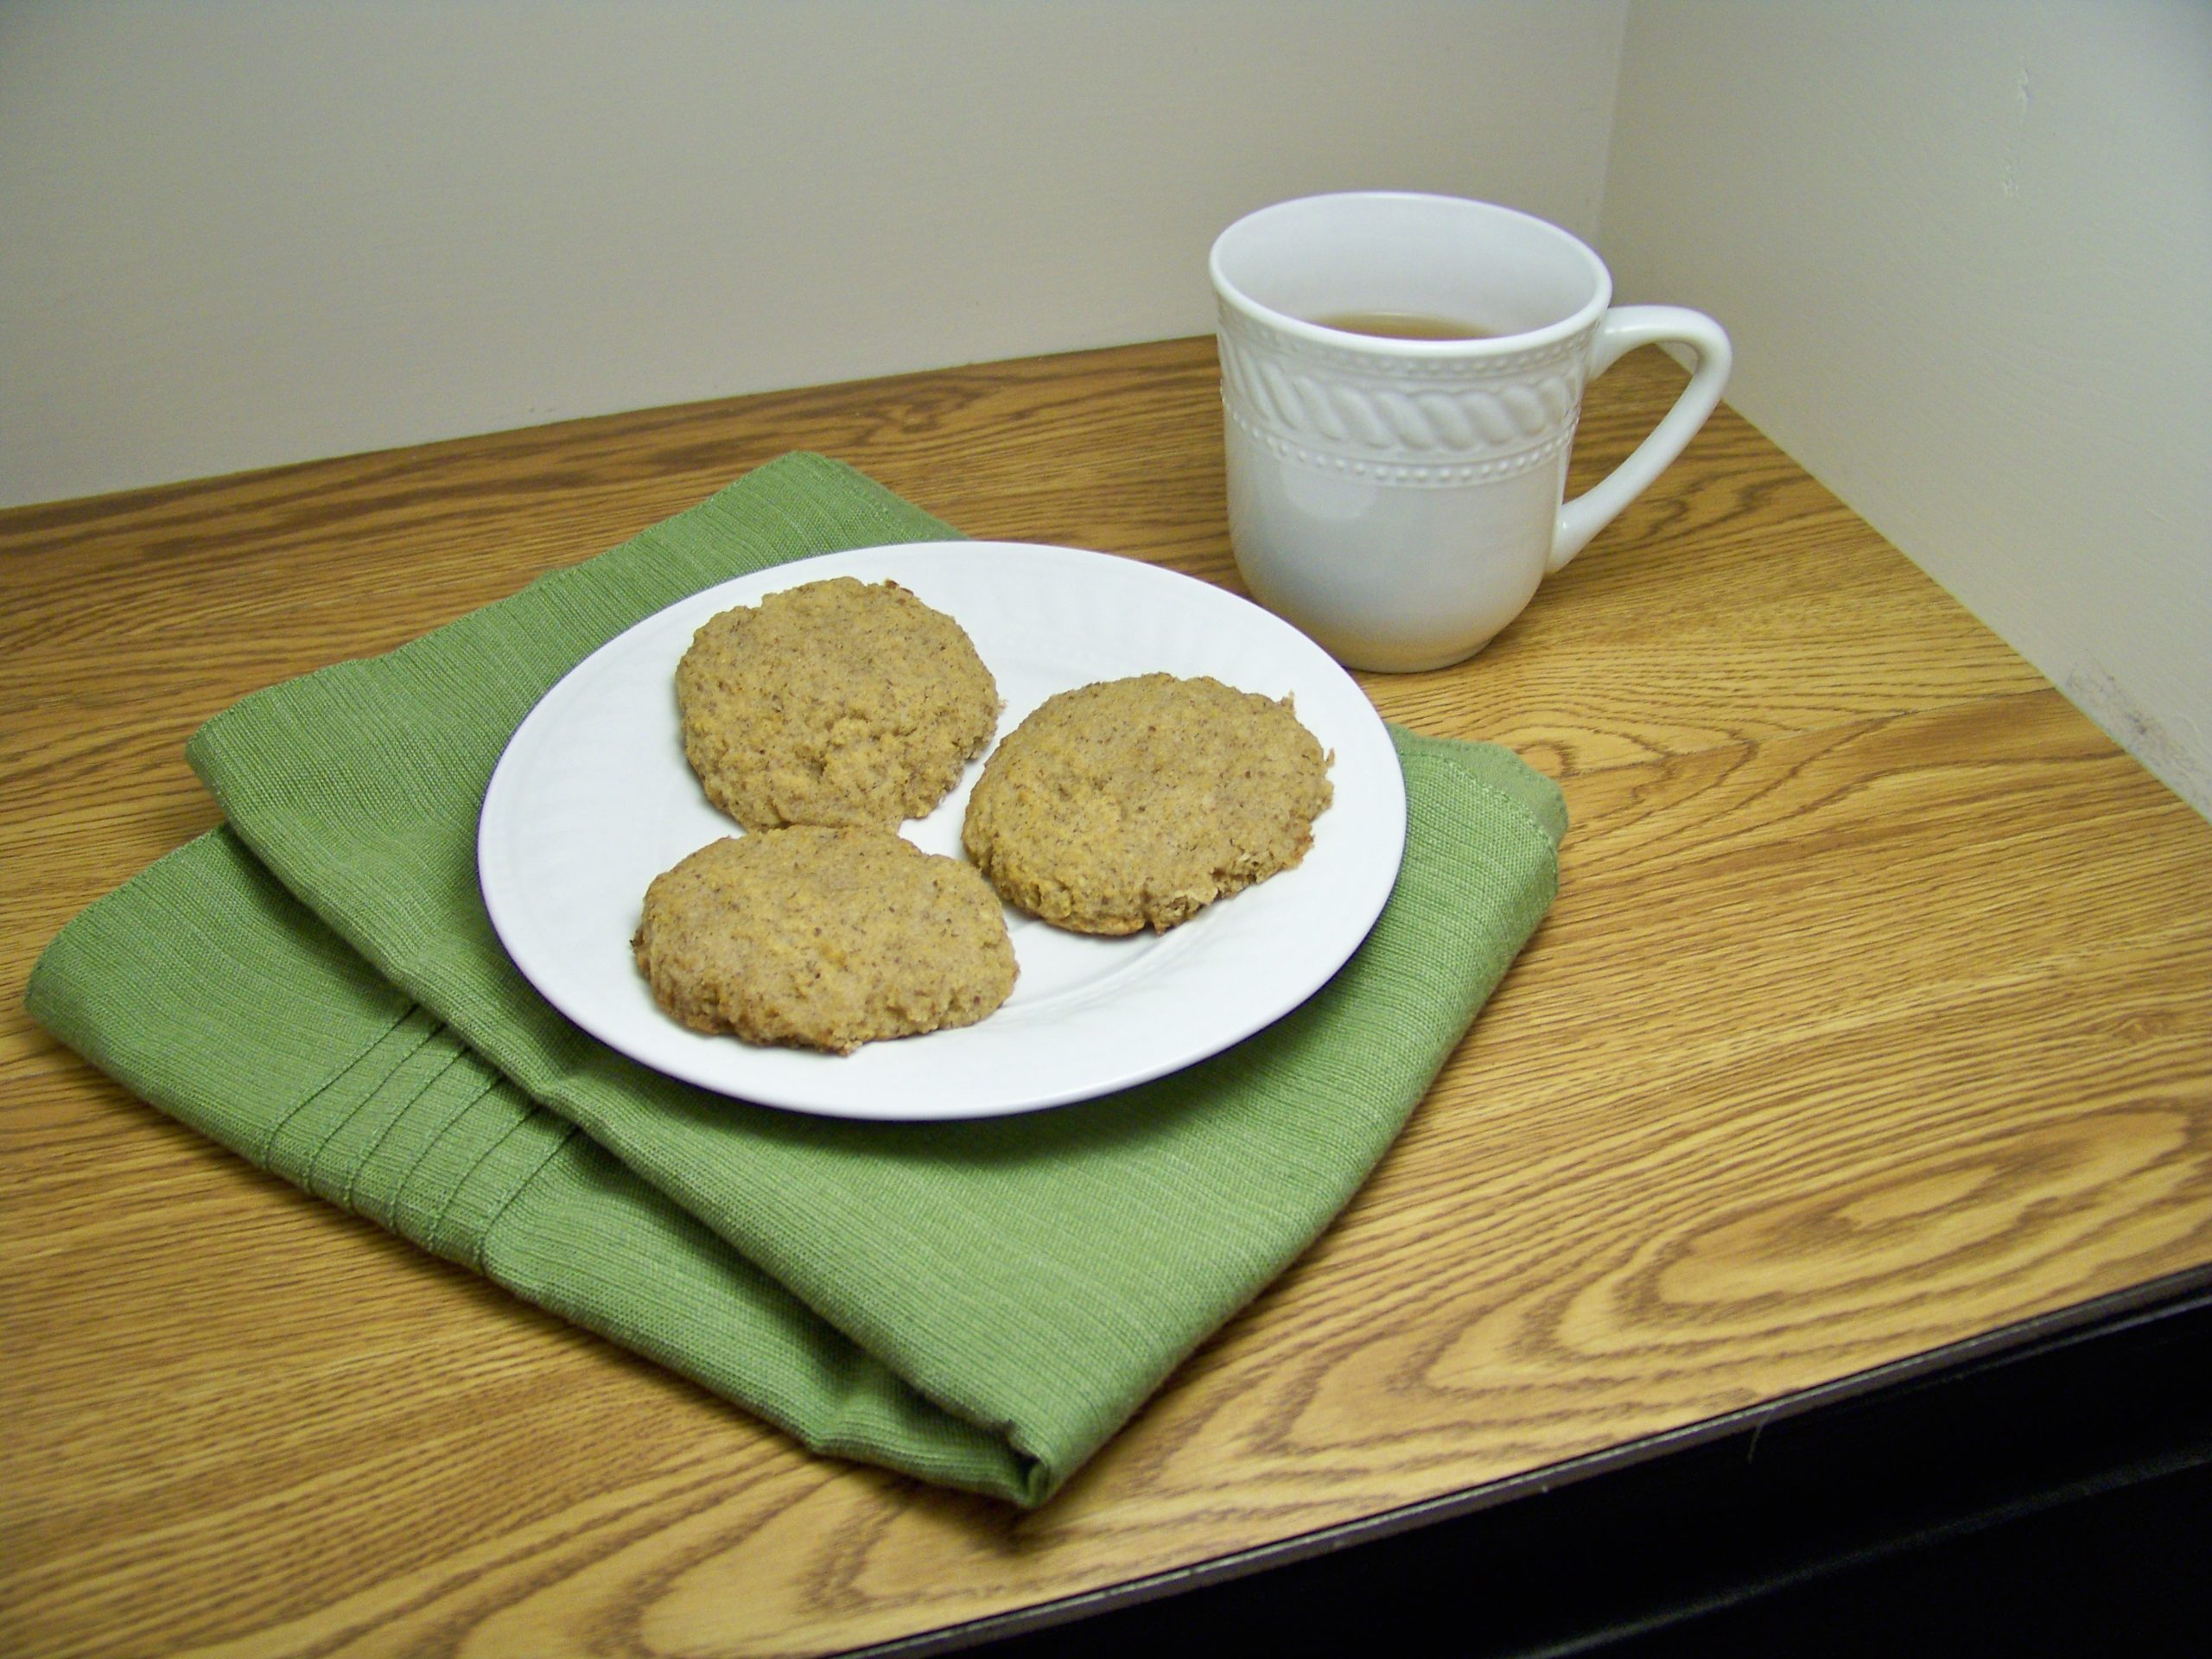 Chai Sugar cookies on a white plate with a green placemat folded underneath, a white mug of tea to the back right